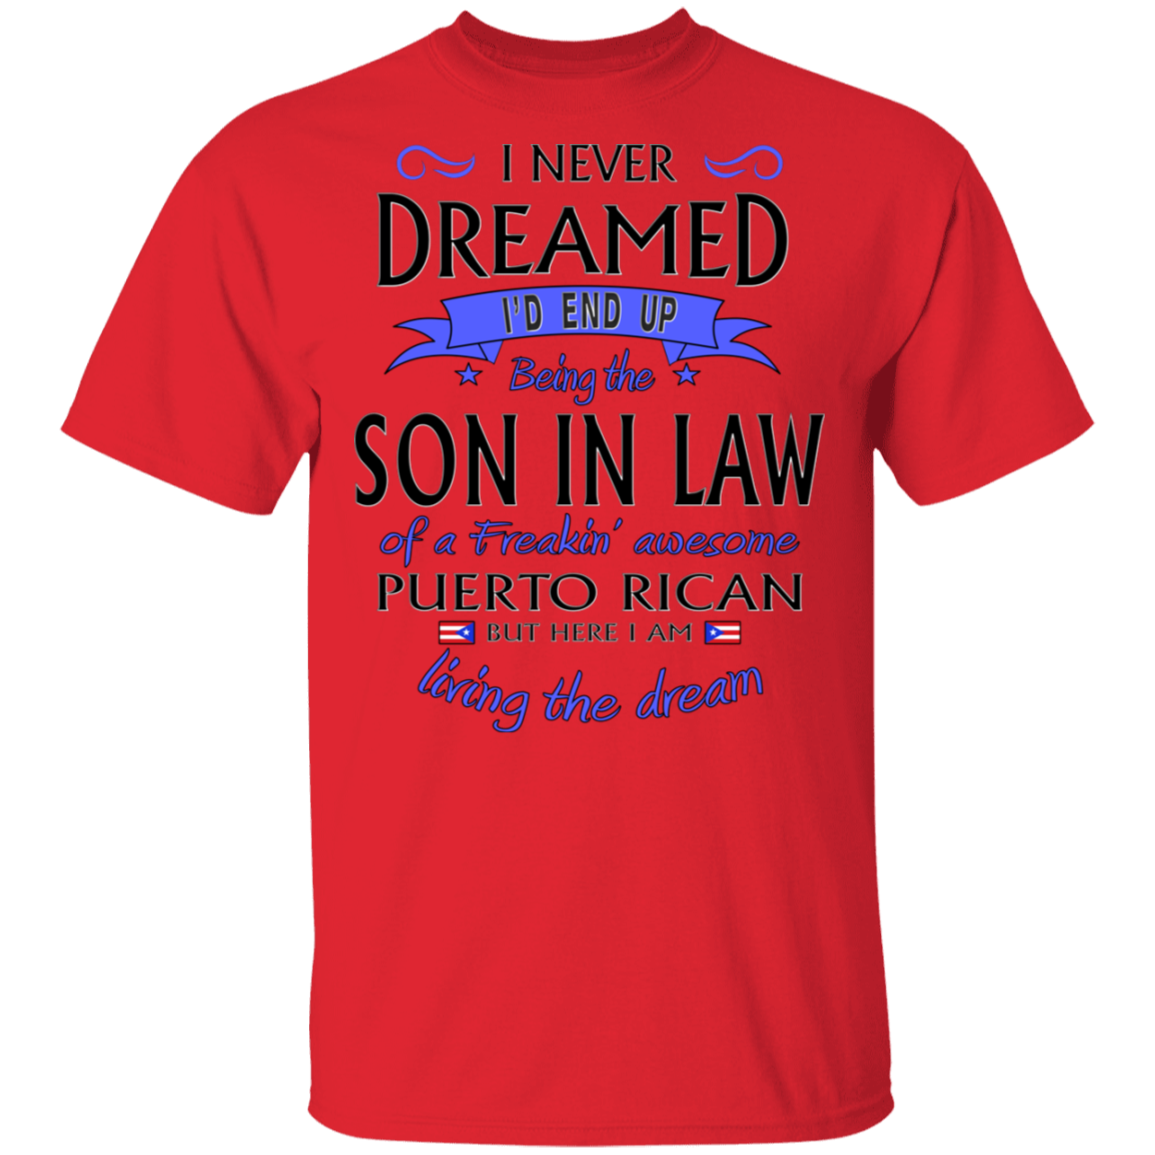 Son-In-Law of Awesome PR 5.3 oz. T-Shirt - Puerto Rican Pride